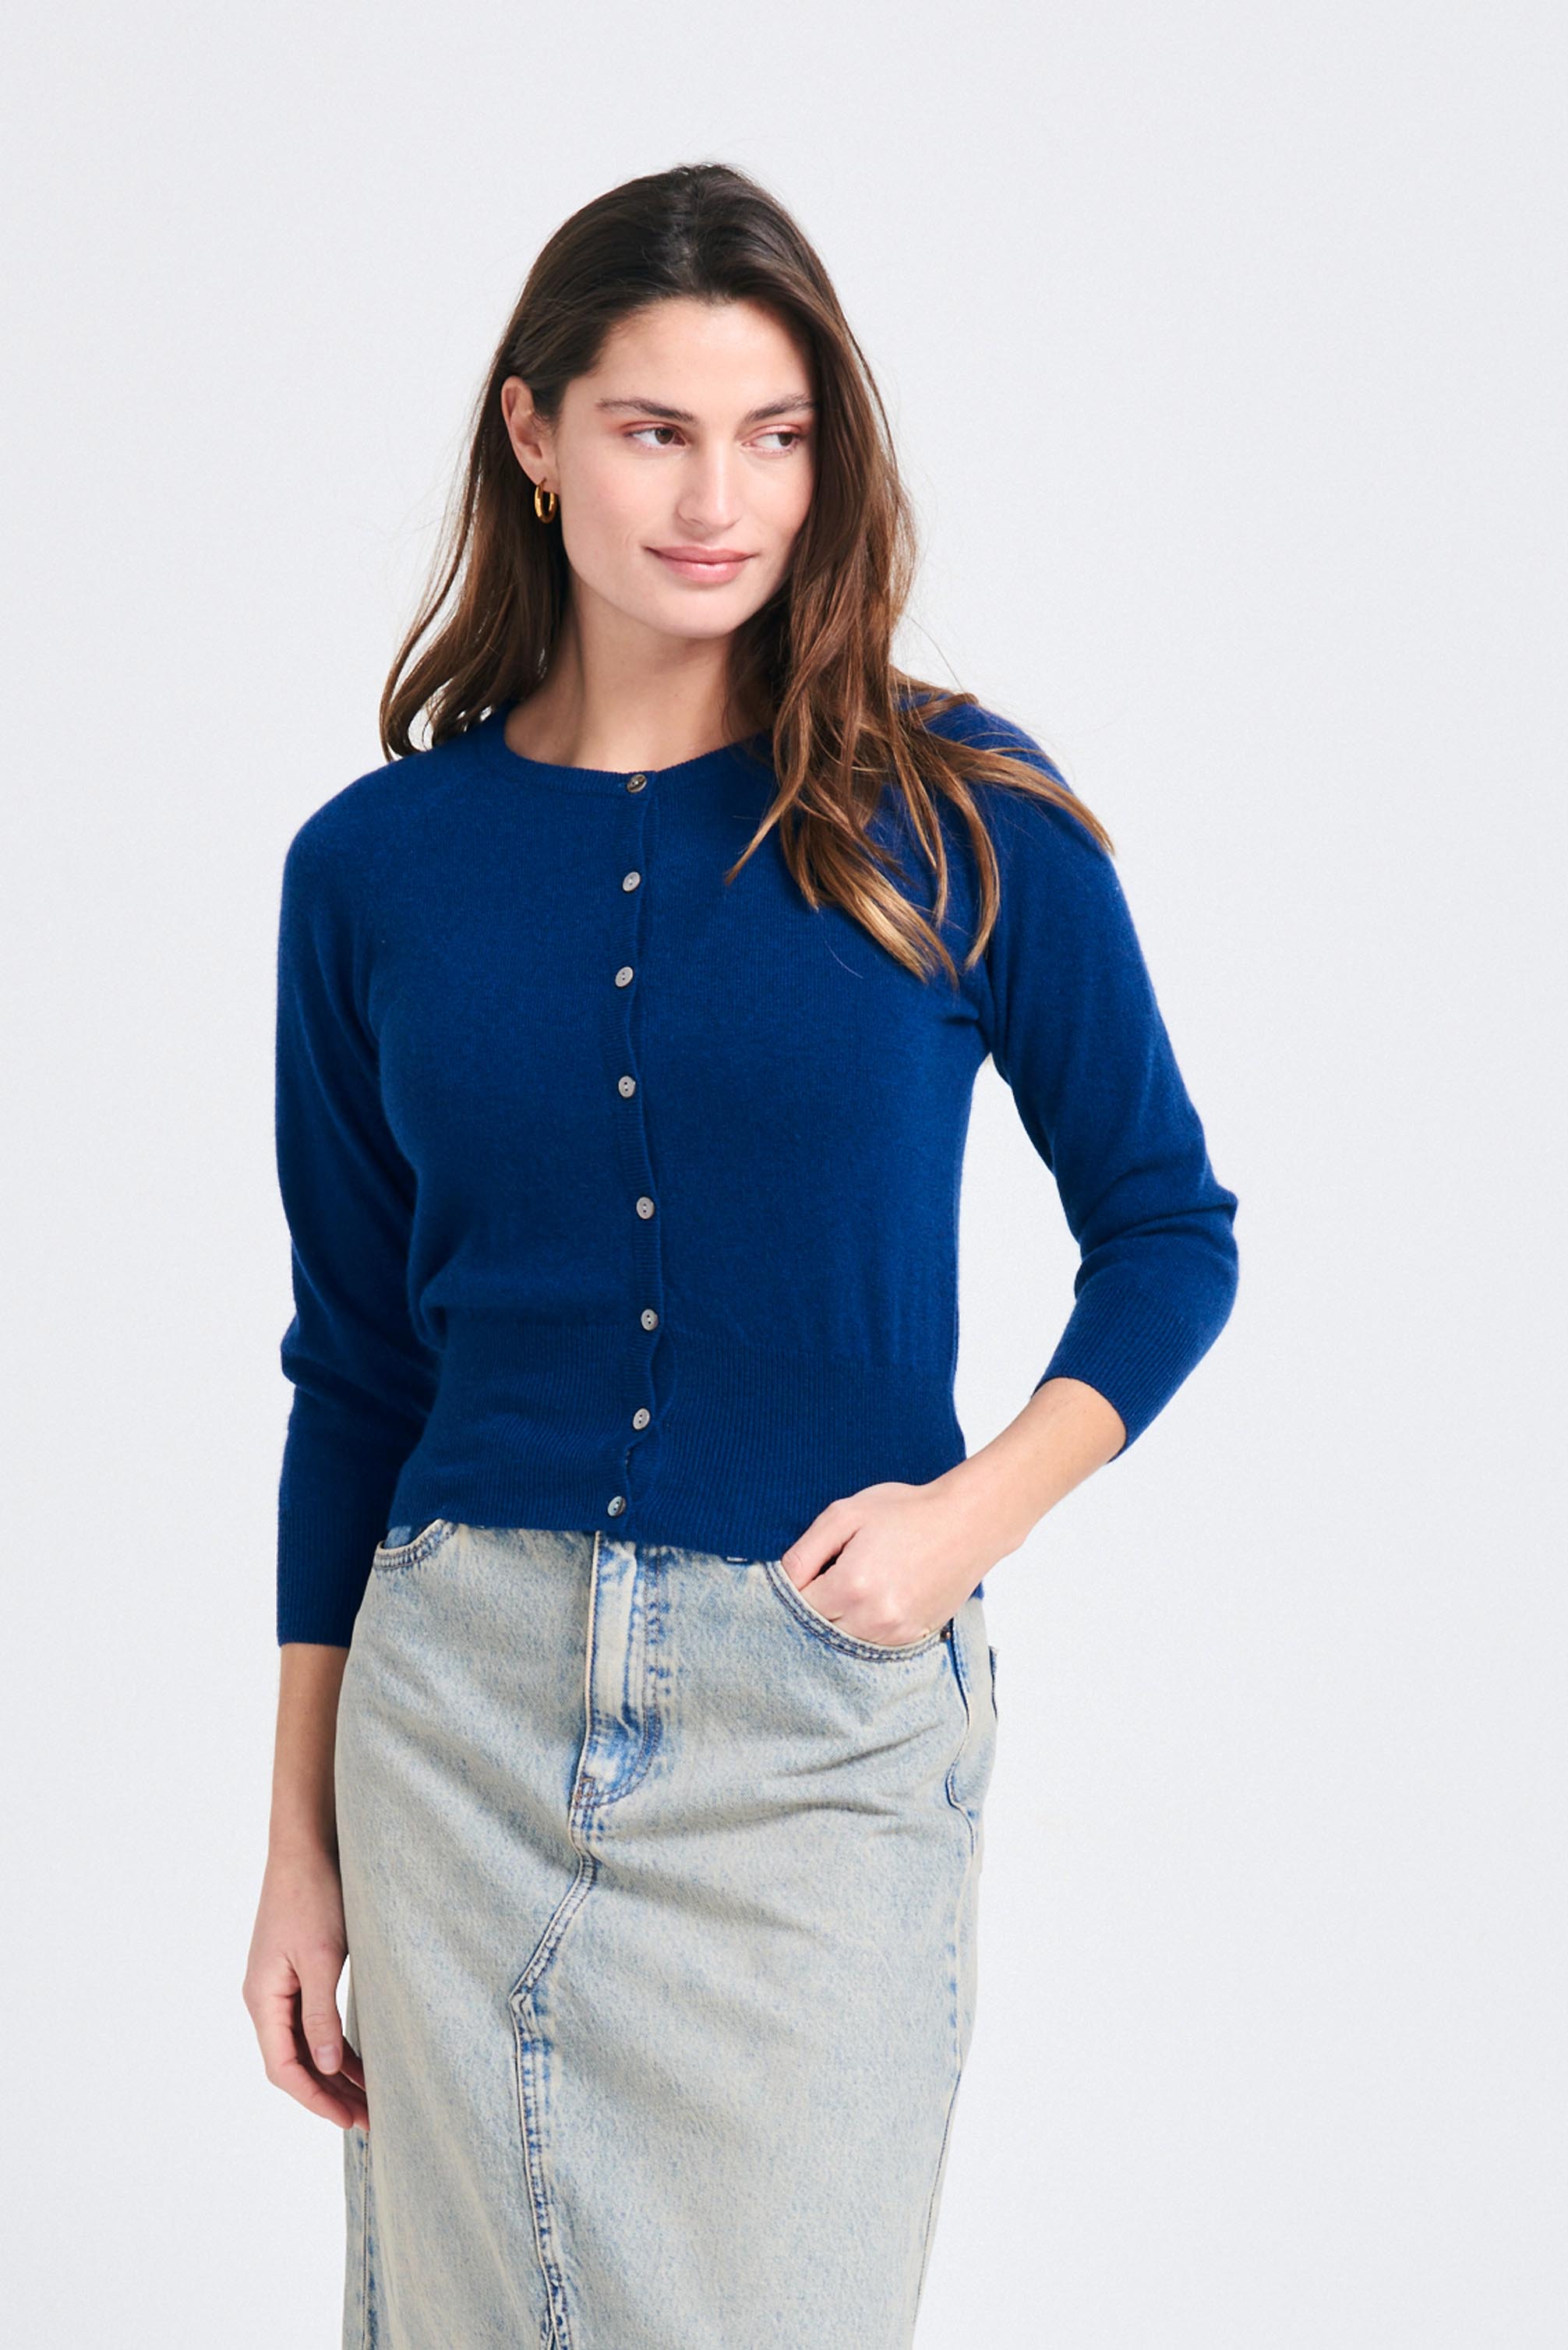 Brown haired female model wearing Jumper1234 neat fit cashmere round neck cardigan in denim blue